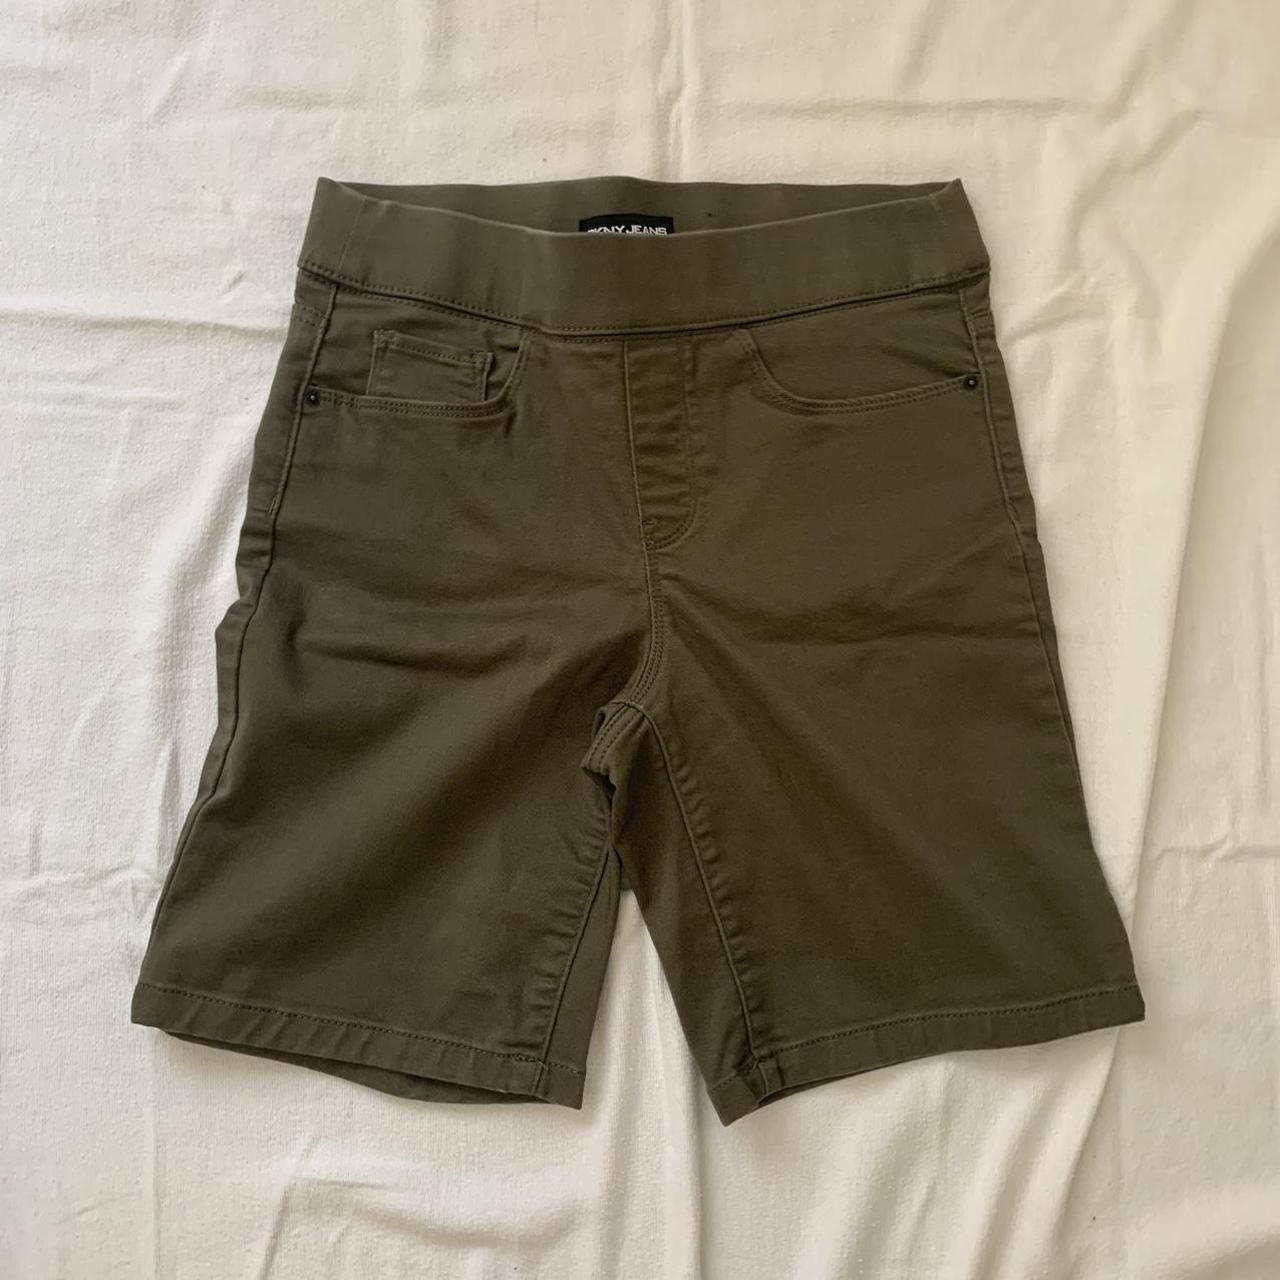 DKNY olive green jorts size small with stretchy... - Depop